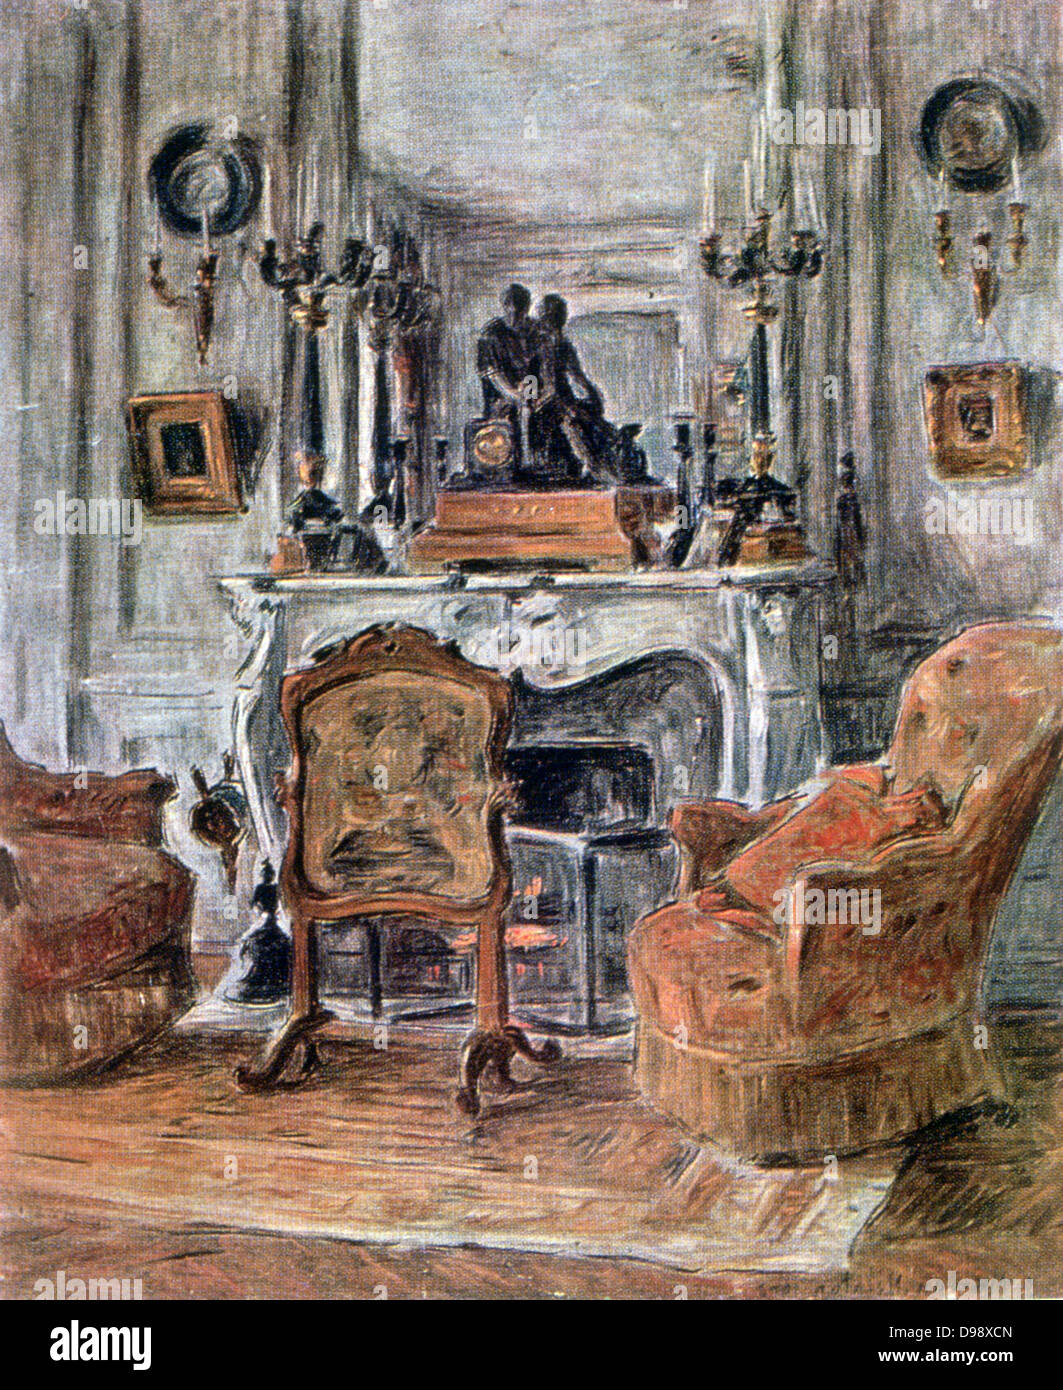 In the Drawing Room', 1900. Oil on canvas. Etienne Moreau-Nelaton (1859-1927) French painter, writer and art historian. Domestic Interior Fireplace Mirror Candelabra Armchair Firescreen Rug Stock Photo